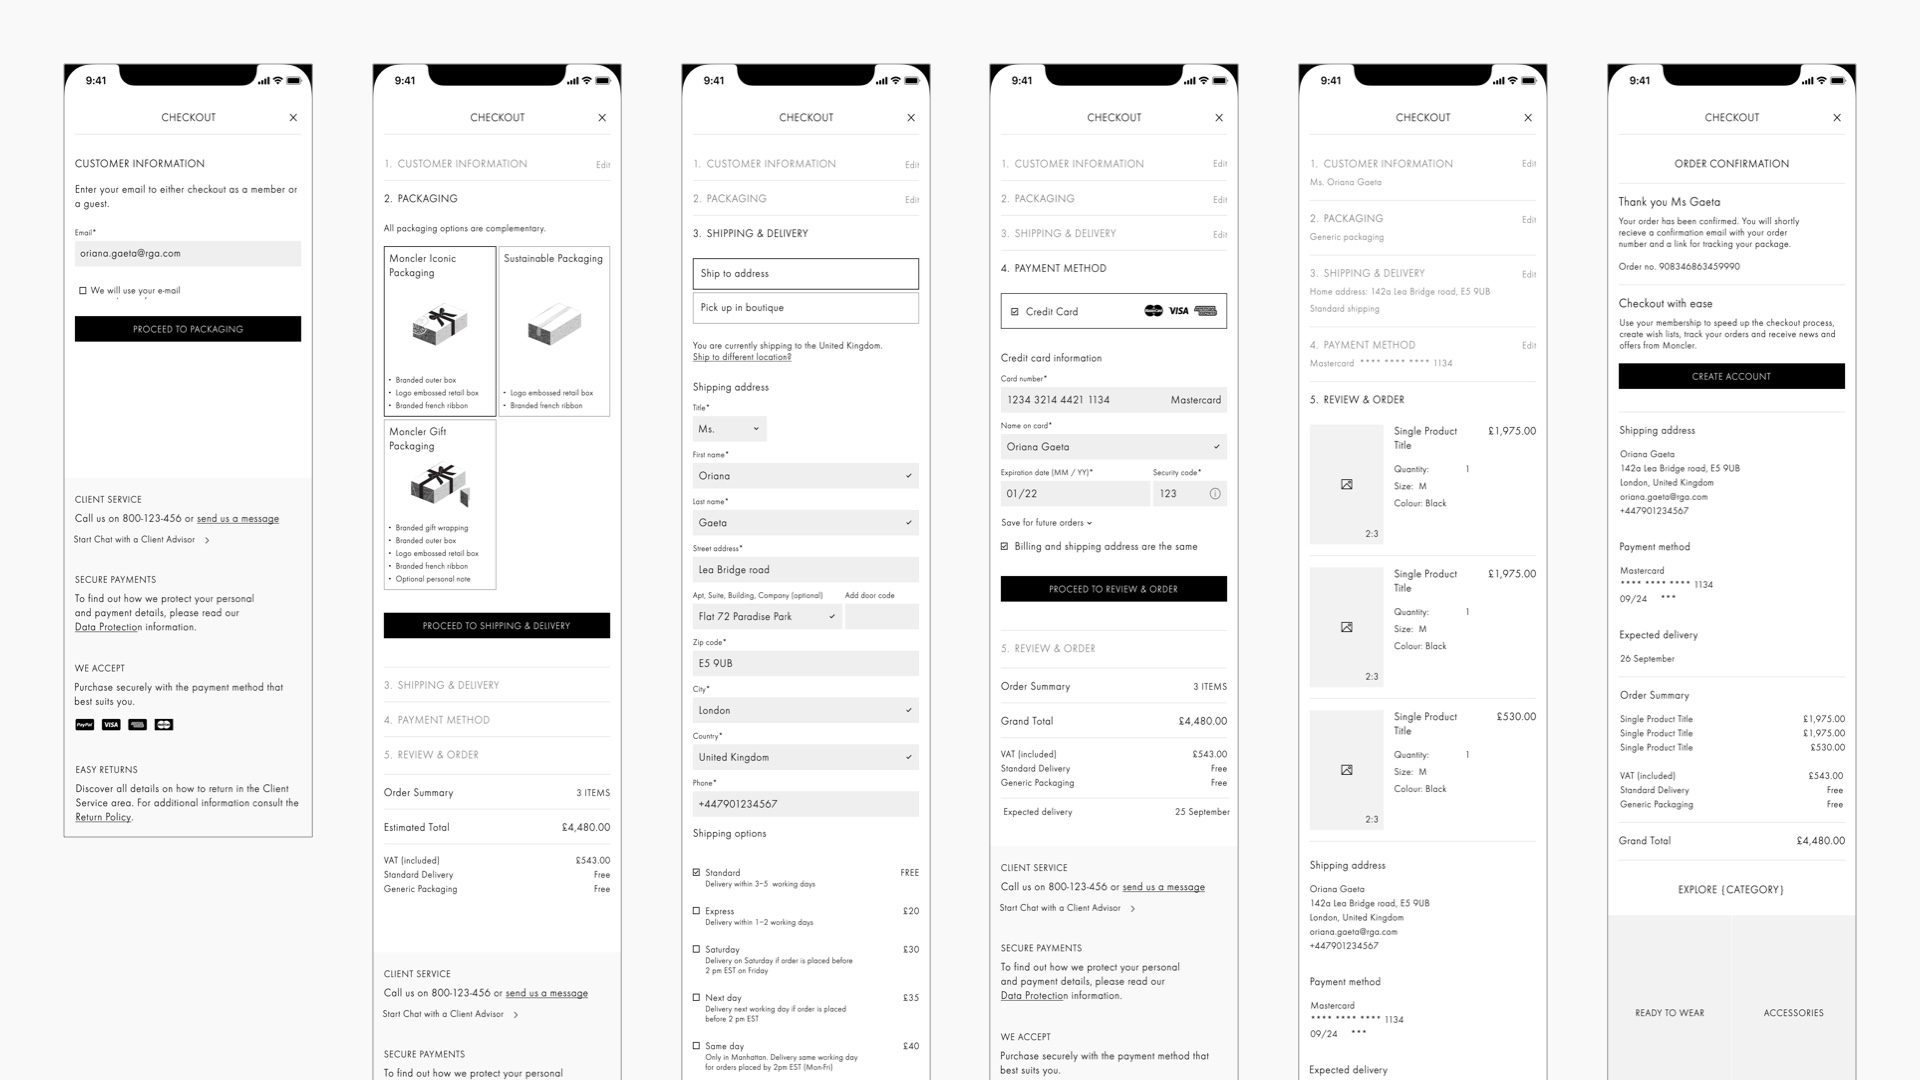 A series of wireframes showing the information structure and user interactions on the checkout pages